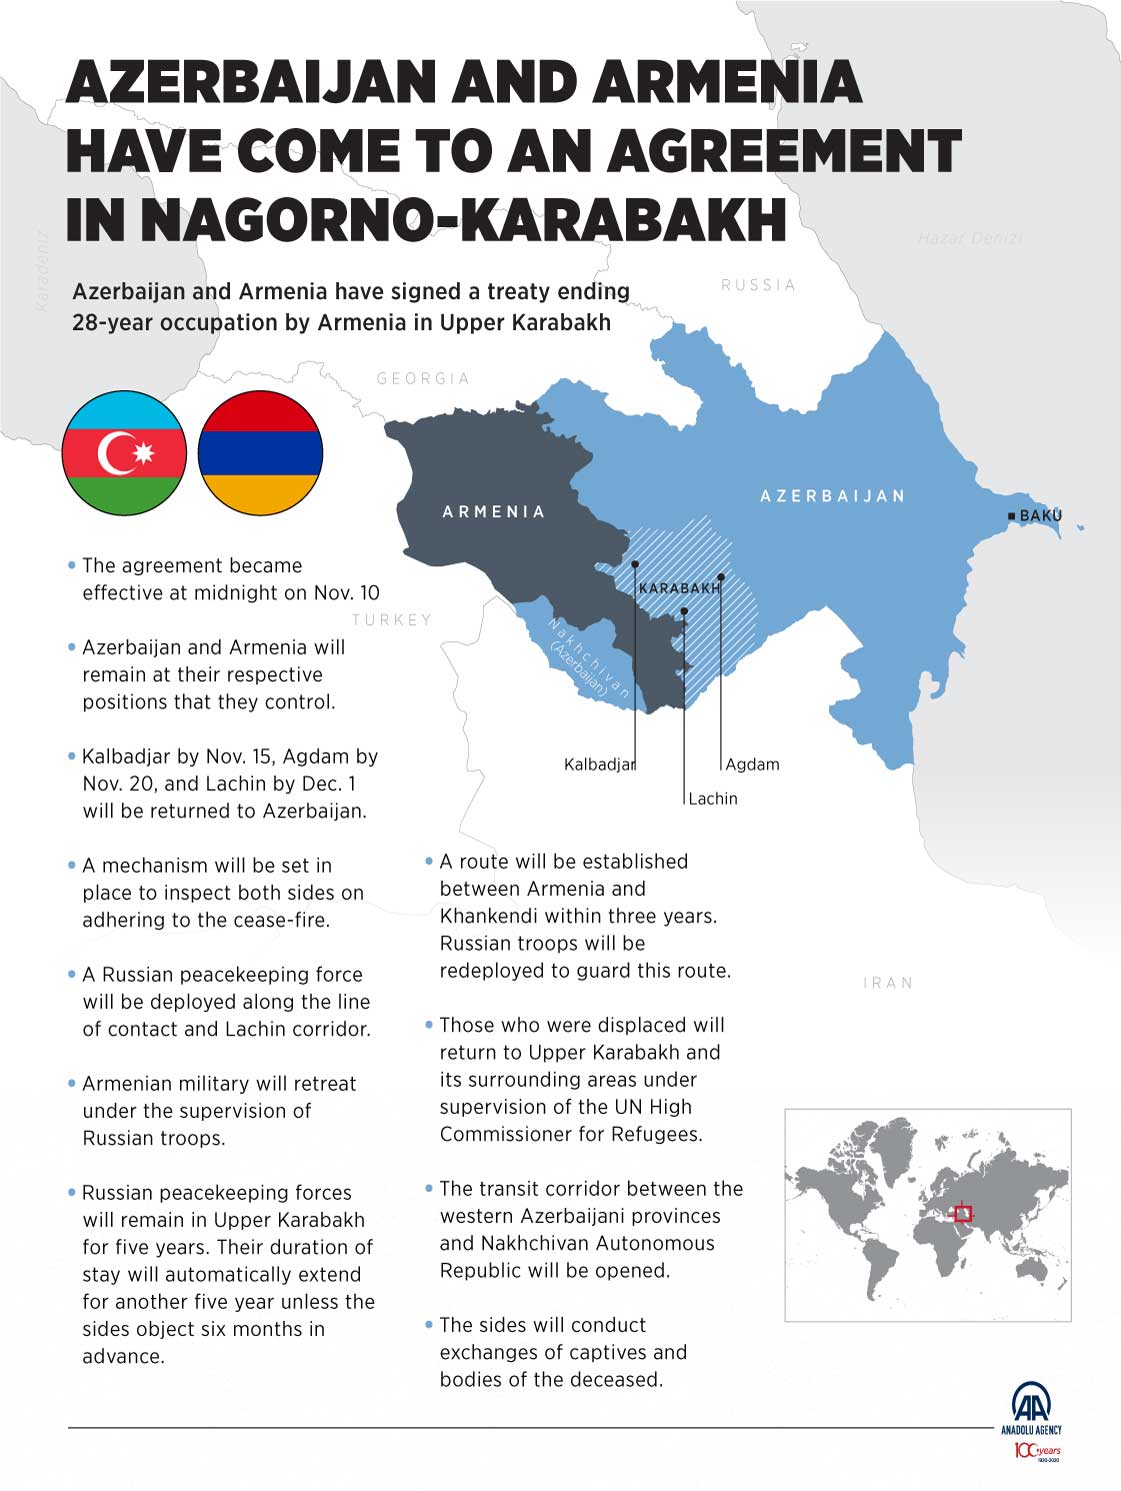 Azerbaijan and Armenia have come to an agreement in Nagorno-Karabakh